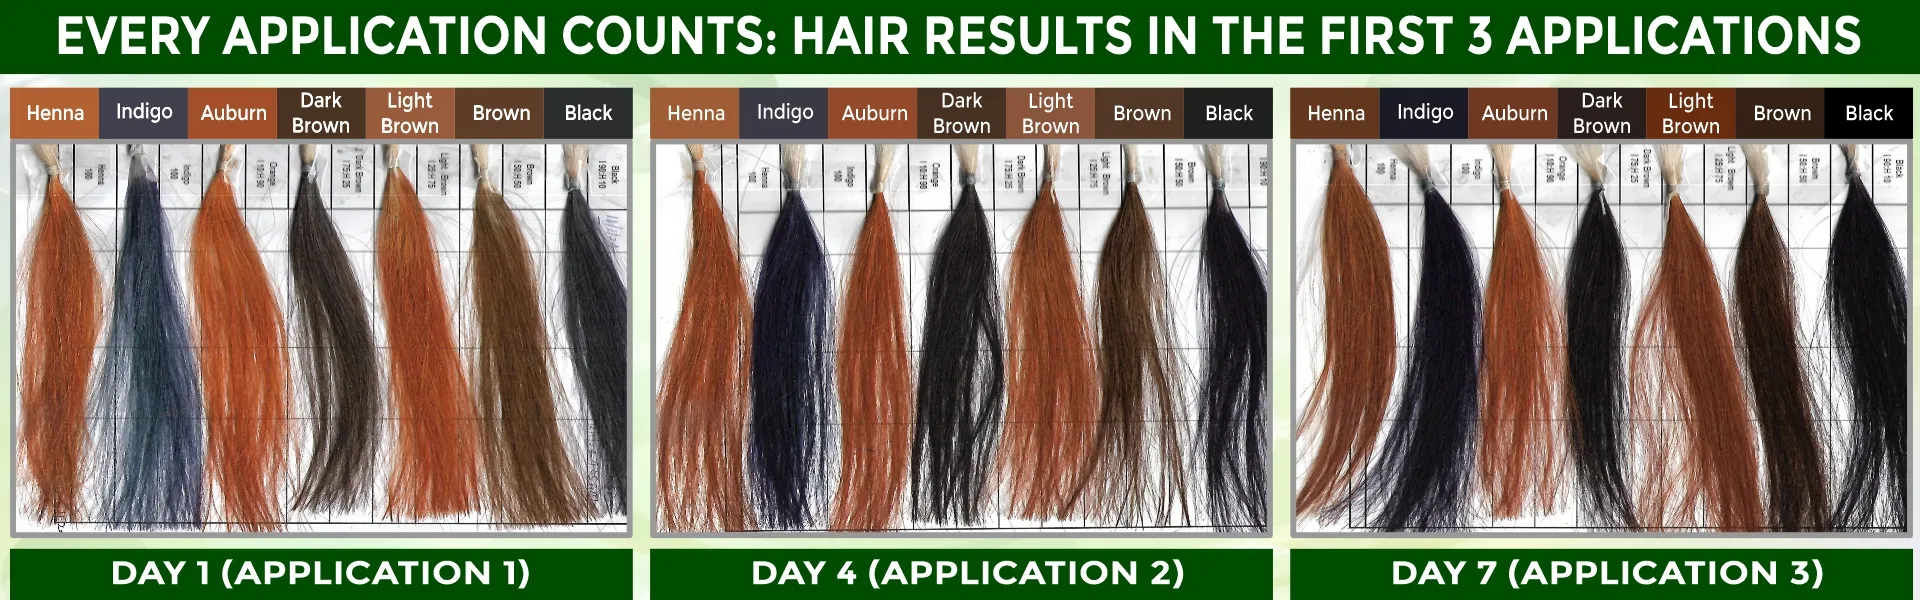 Chemical free hair color results - www.dkihenna.com